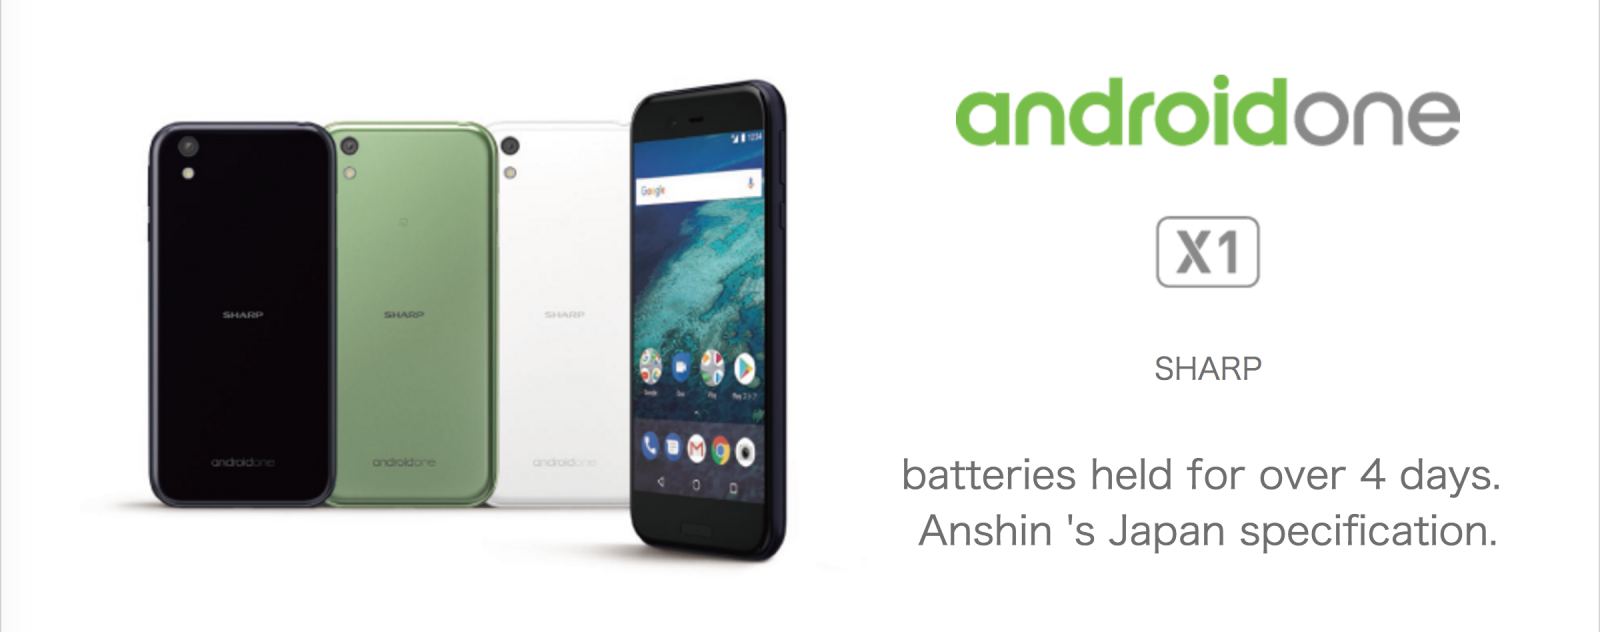 Sharp S Latest Android One Device For Japan Has A Whopping 4 Day Battery Life 9to5google